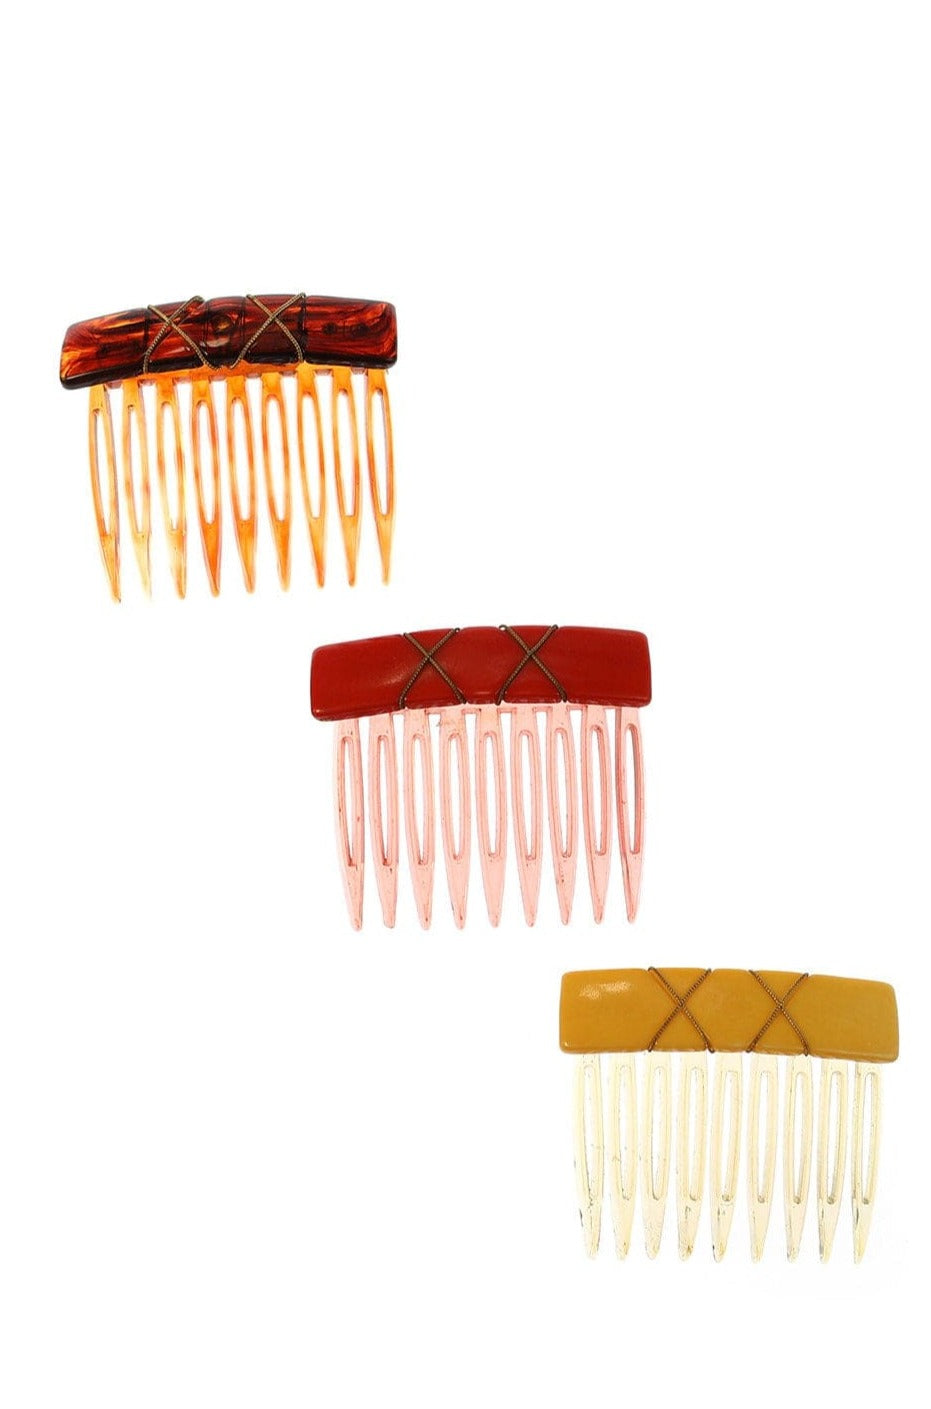 Vintage Criss Cross Wire Inlaid Hair Comb